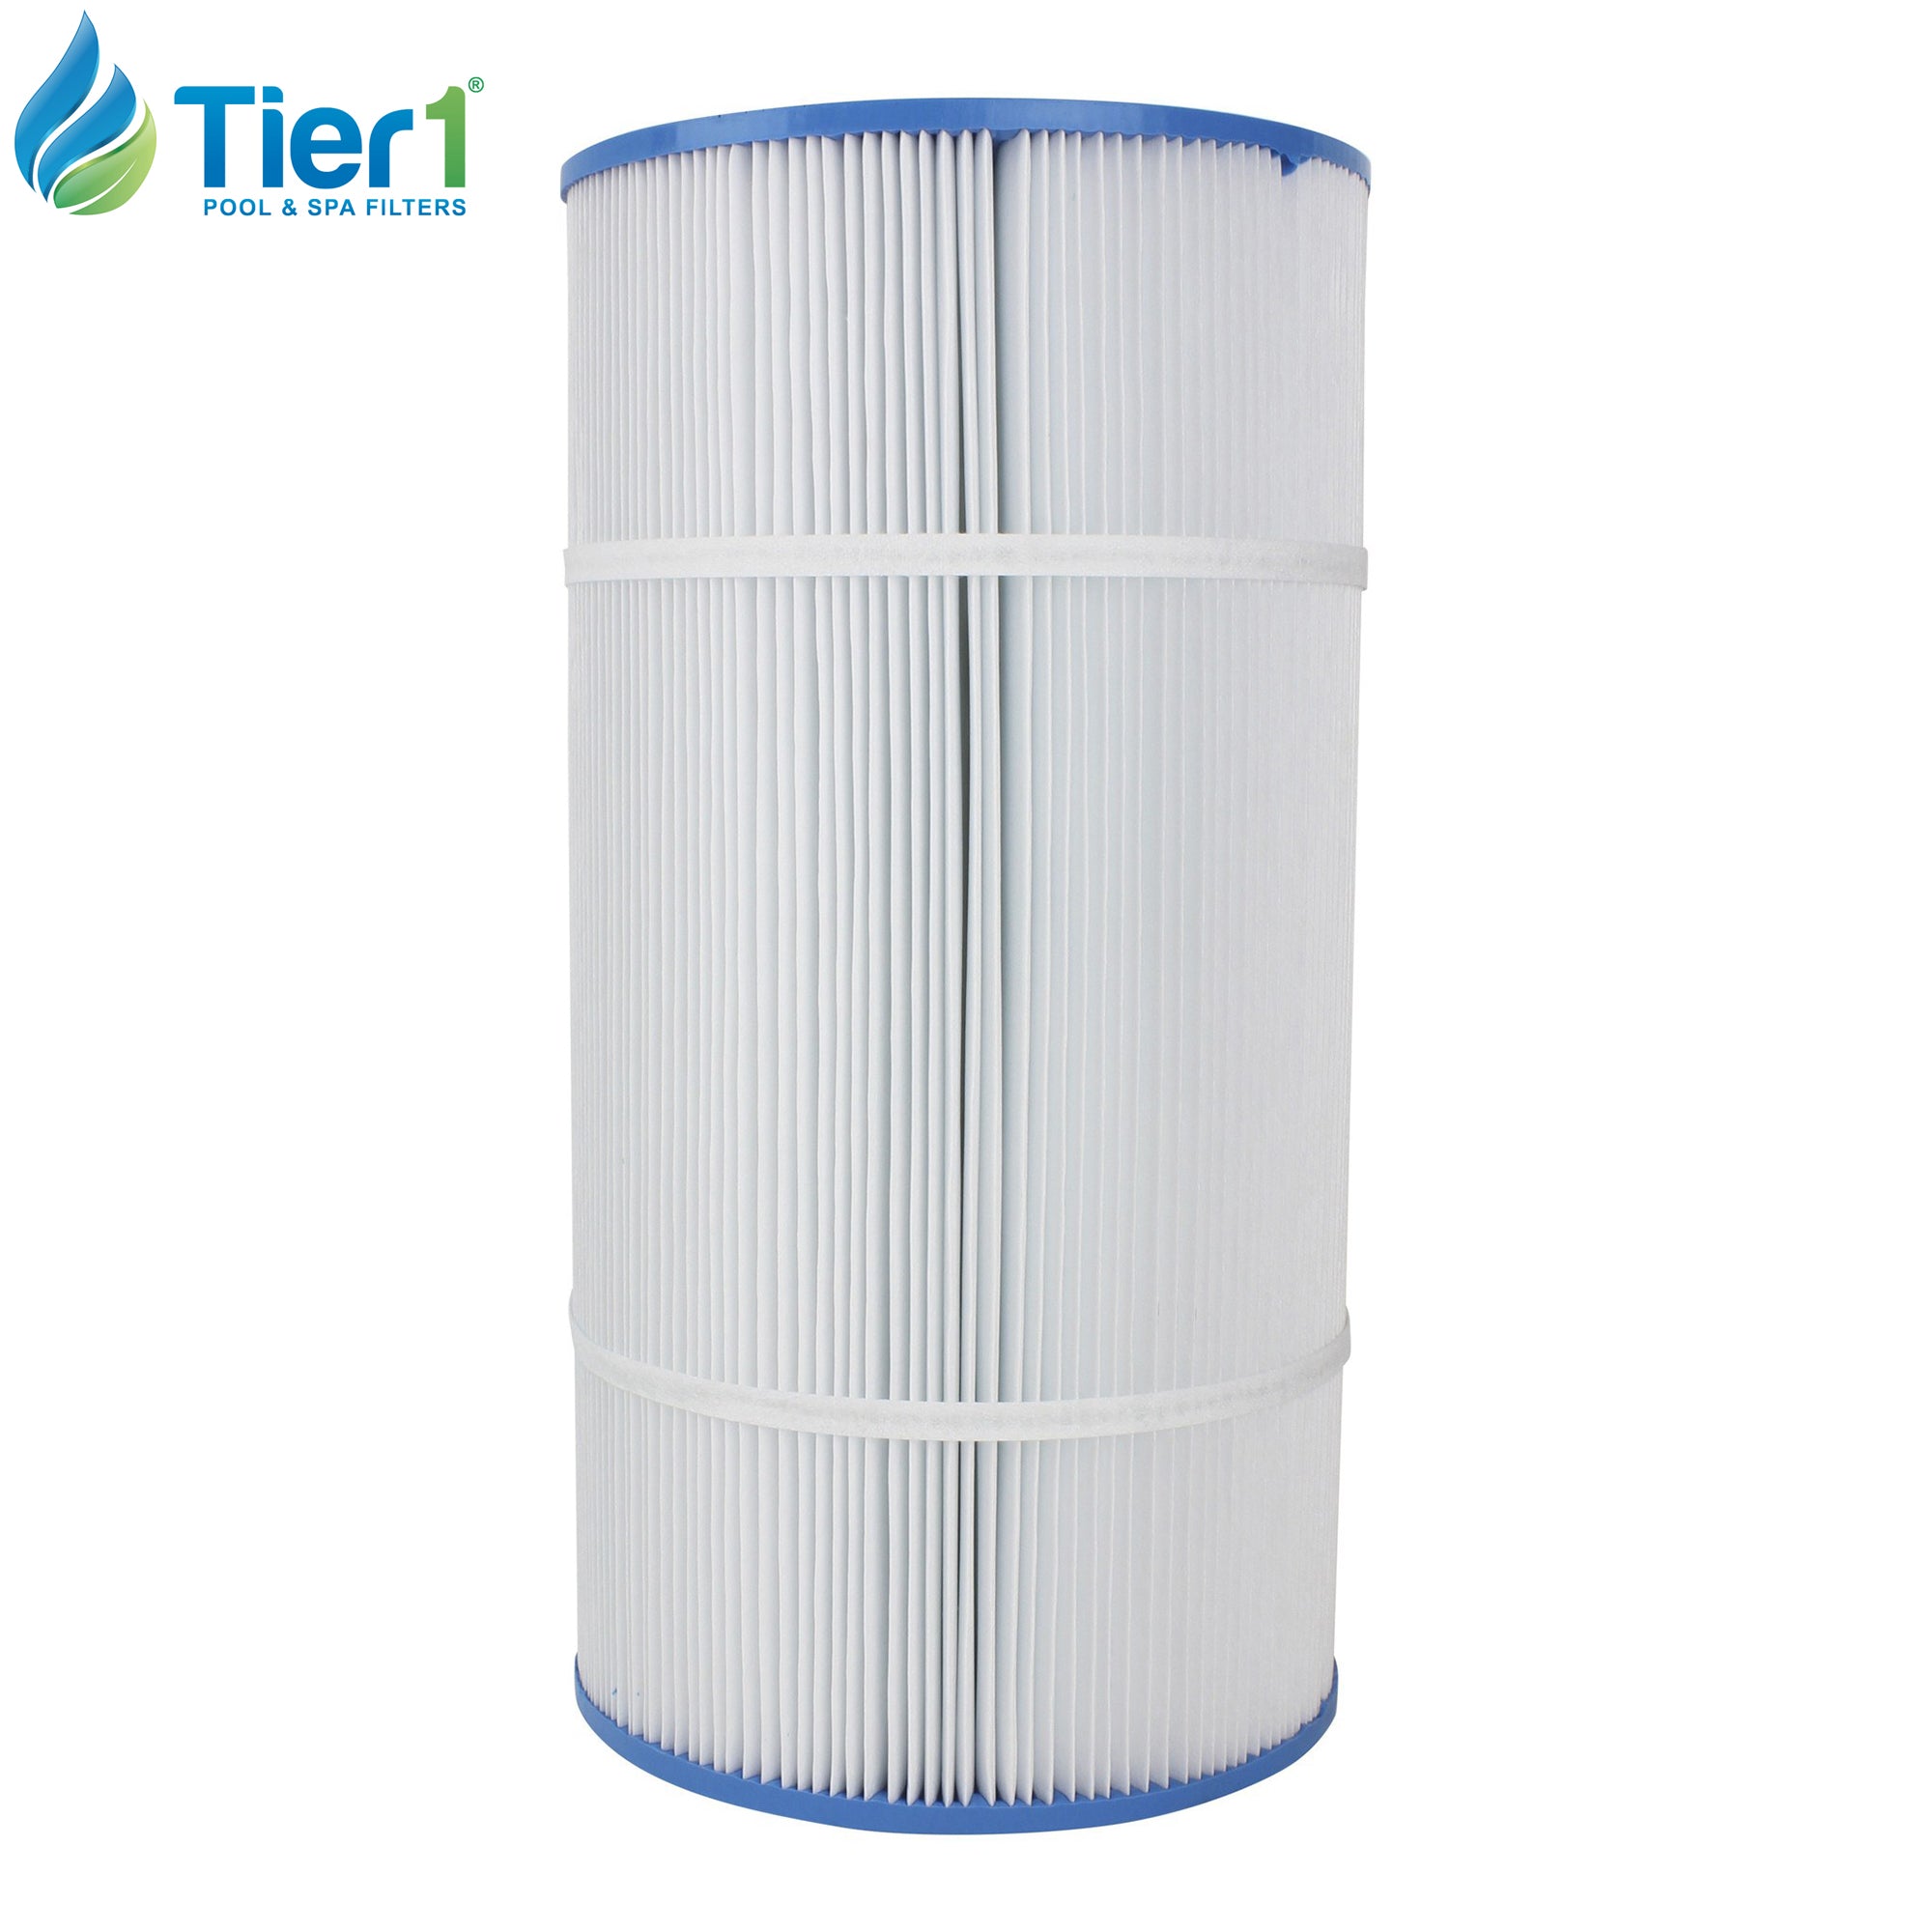 817-0075N Waterway Clearwater Comparable Pool and Spa Filter Replacement by Tier1 (No Label)